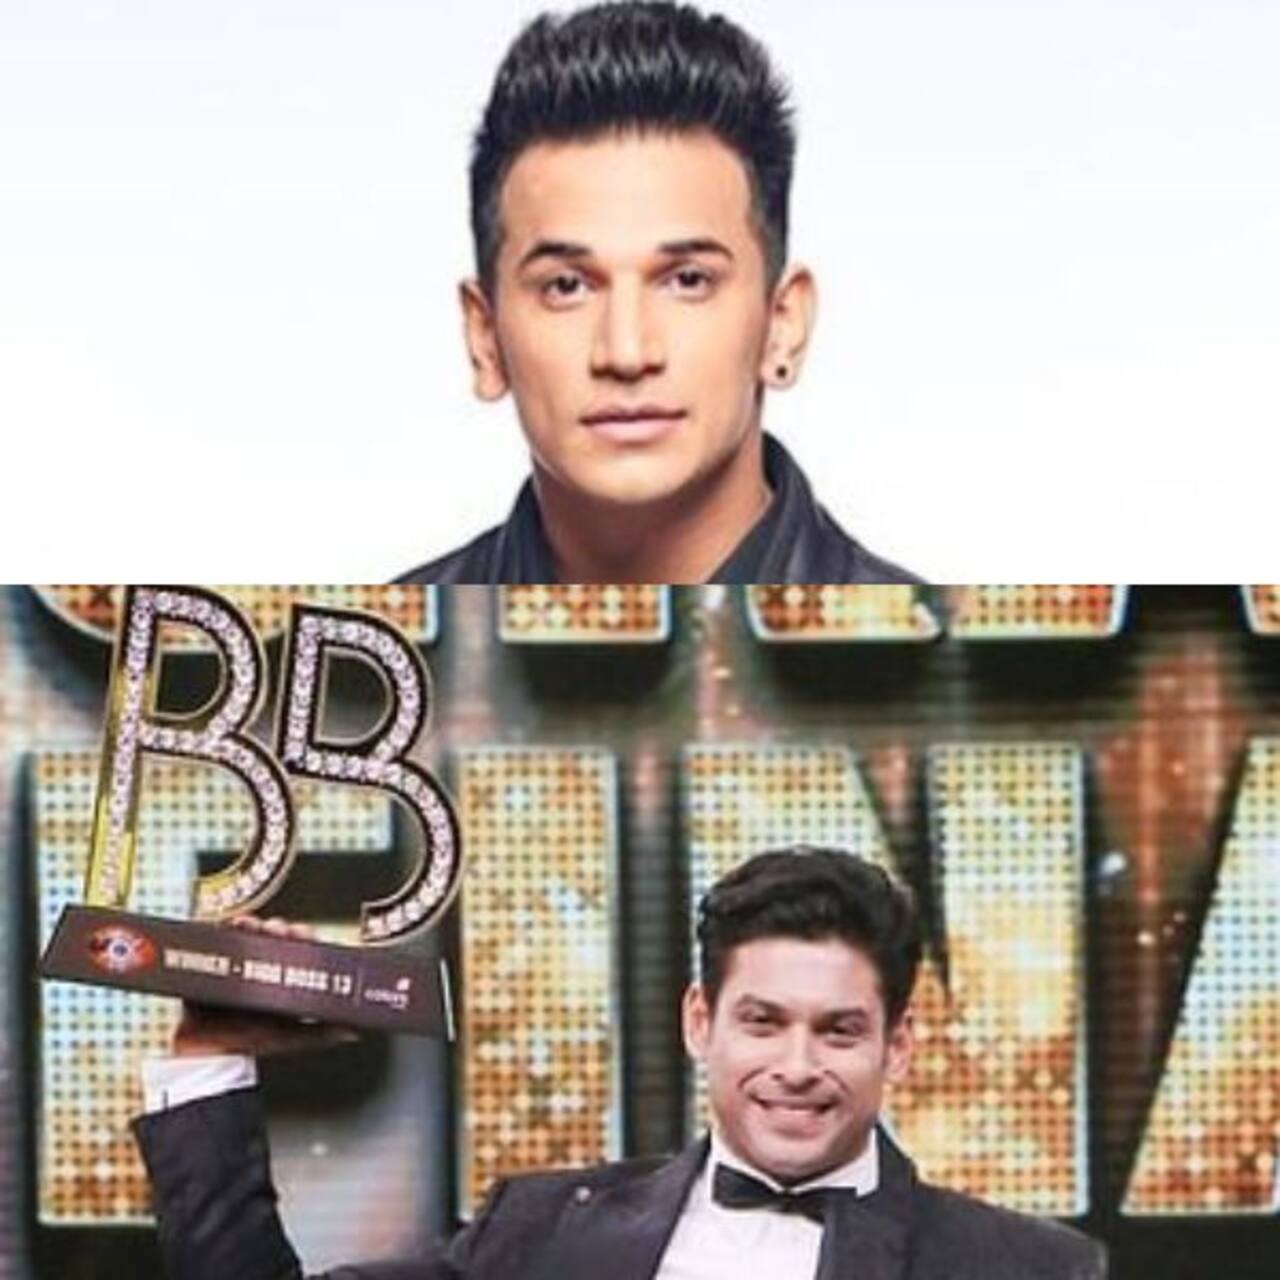 Bigg Boss 13: Prince Narula clarifies after being quoted on his remarks about season winner Sidharth Shukla